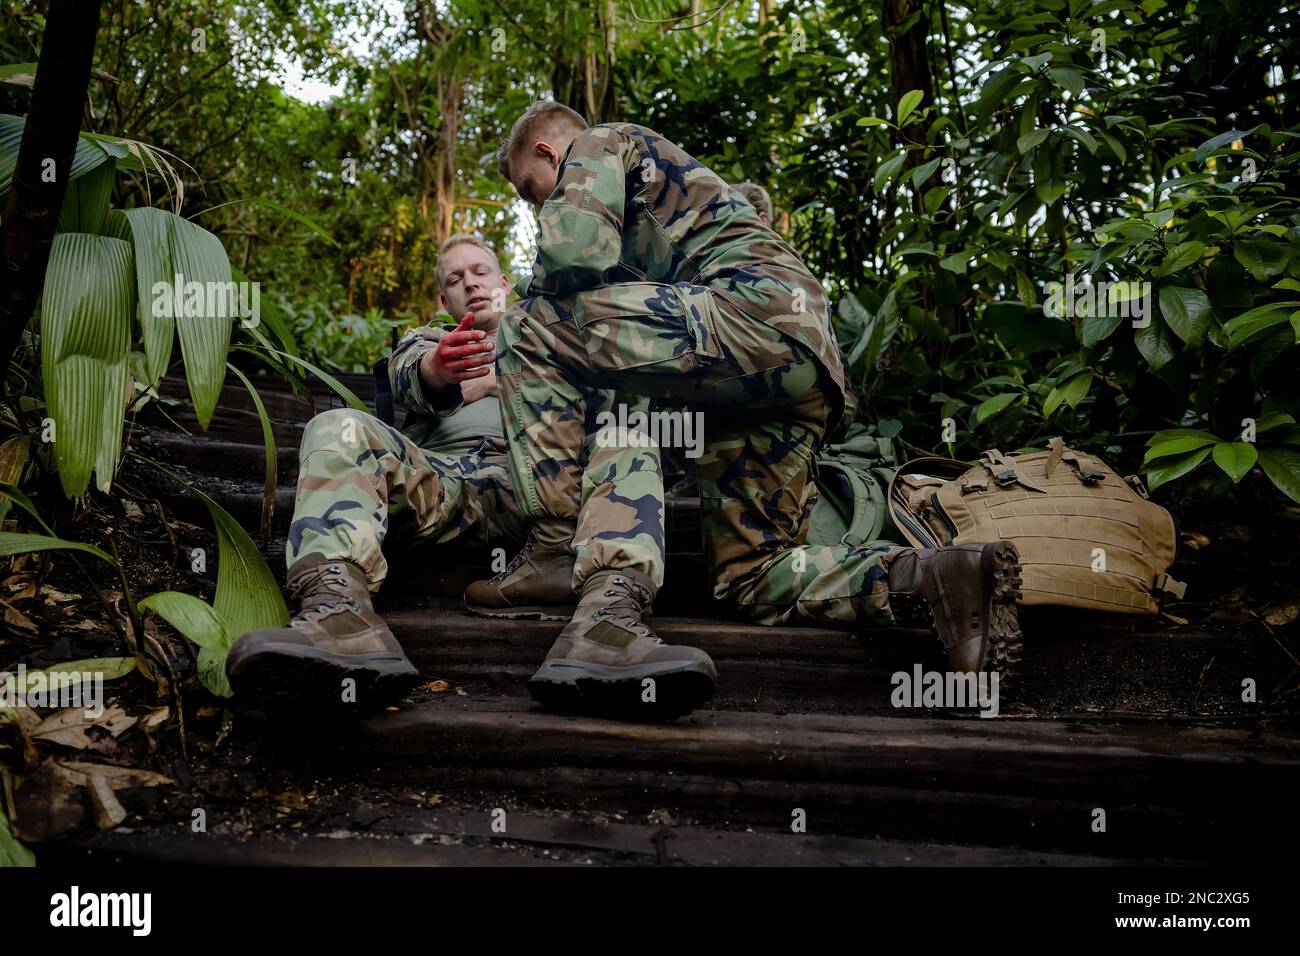 ARNHEM - Marines are training in the covered tropical rainforest of Burgers Zoo for medical scenarios that they might encounter in the jungle of Suriname during a mission. ANP ROBIN VAN LONKHUIJSEN netherlands out - belgium out Stock Photo